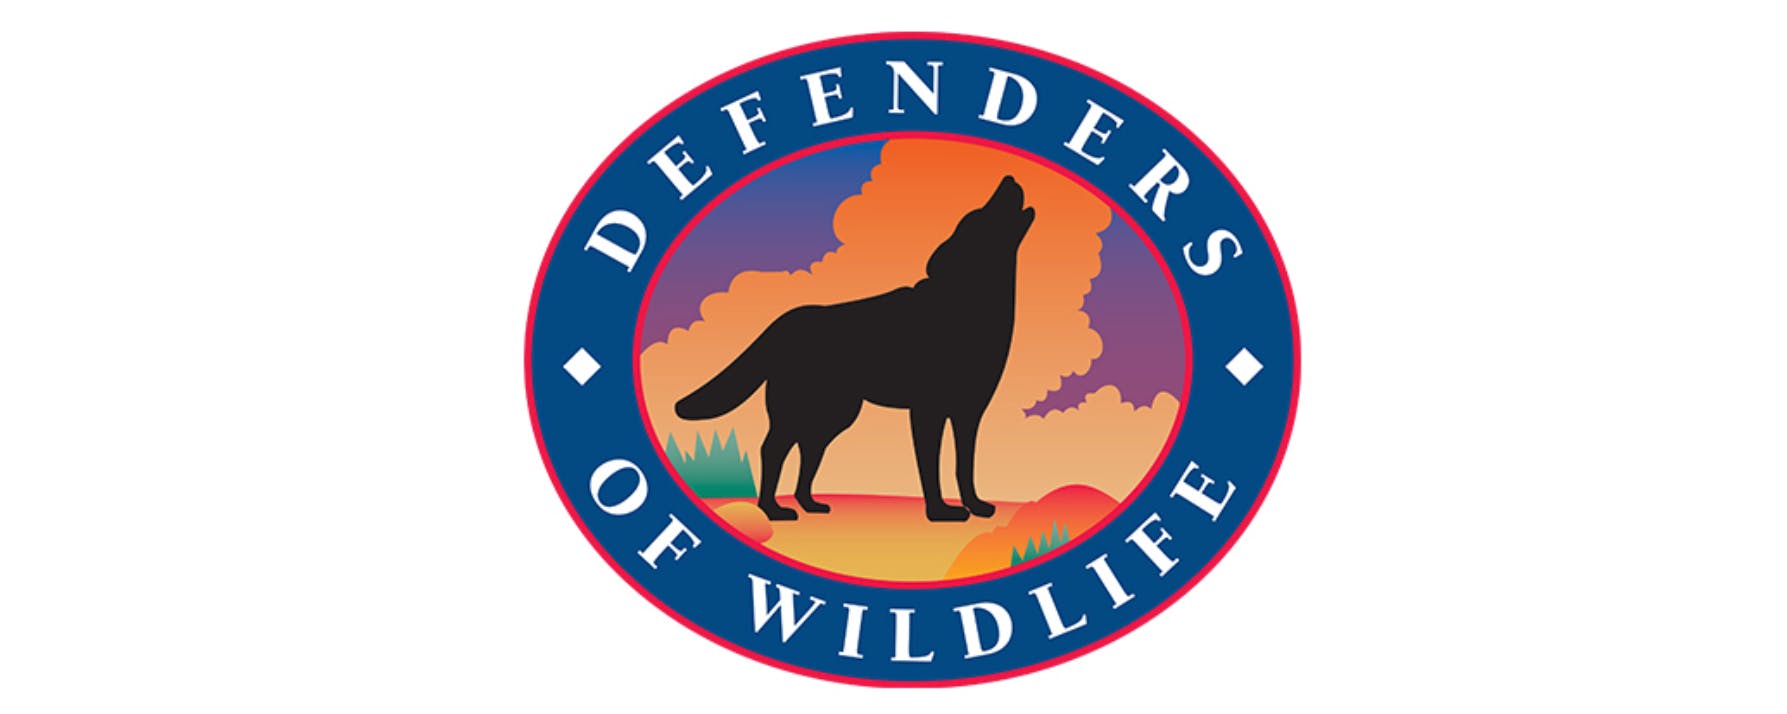 The logo for Defenders of Wildlife. 